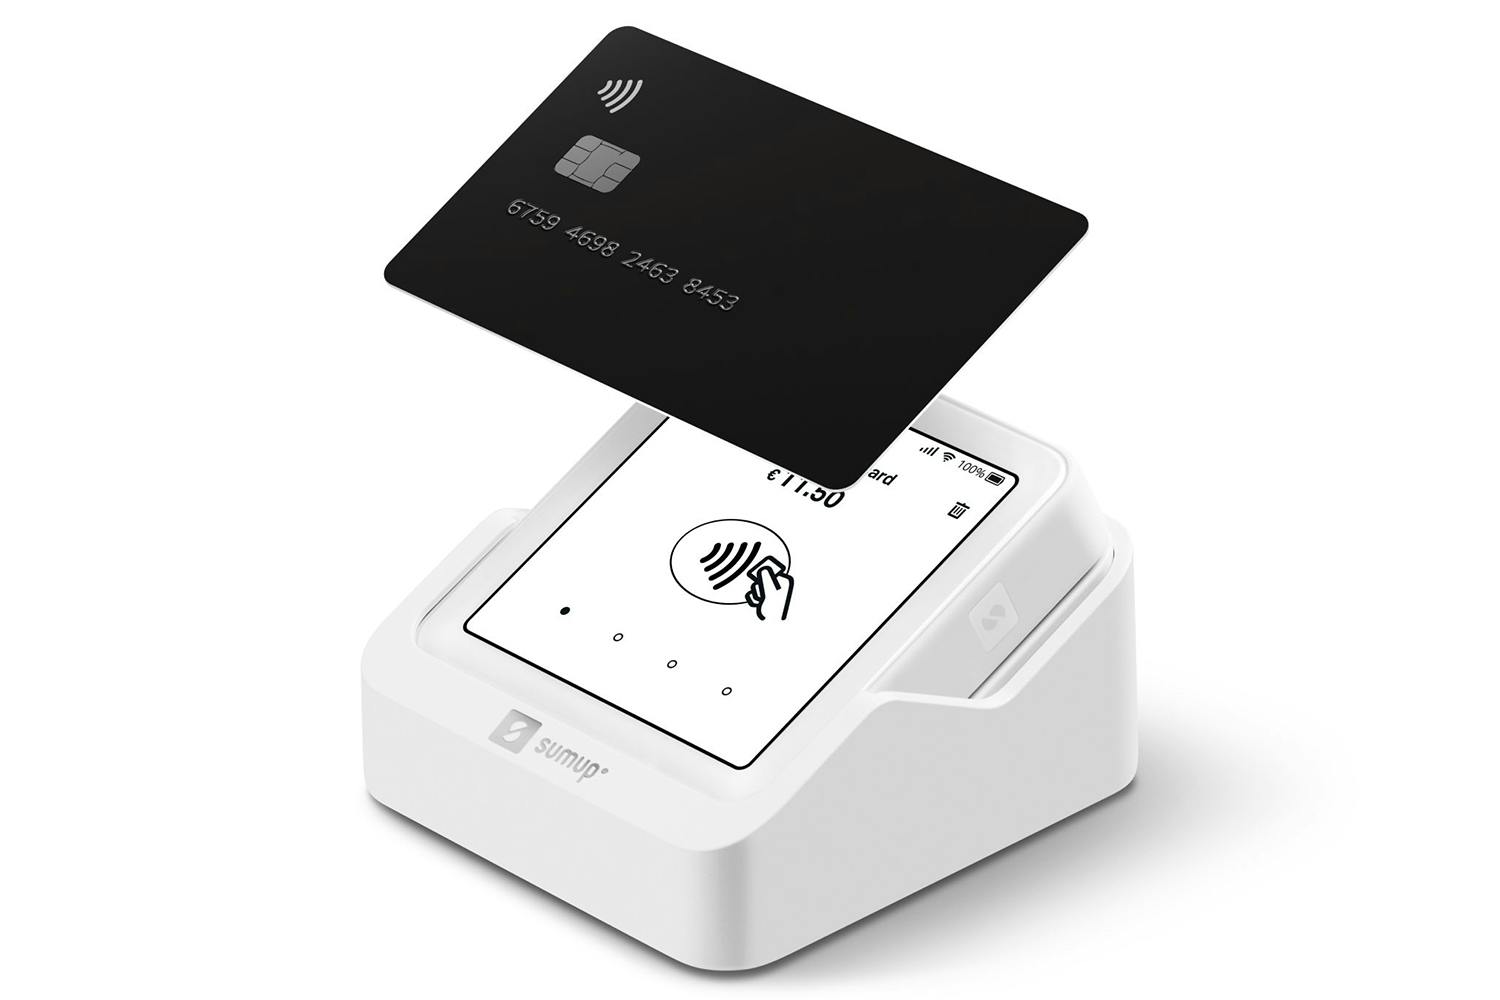 Forget AirTag: AirCard Has Features Apple Can't Match